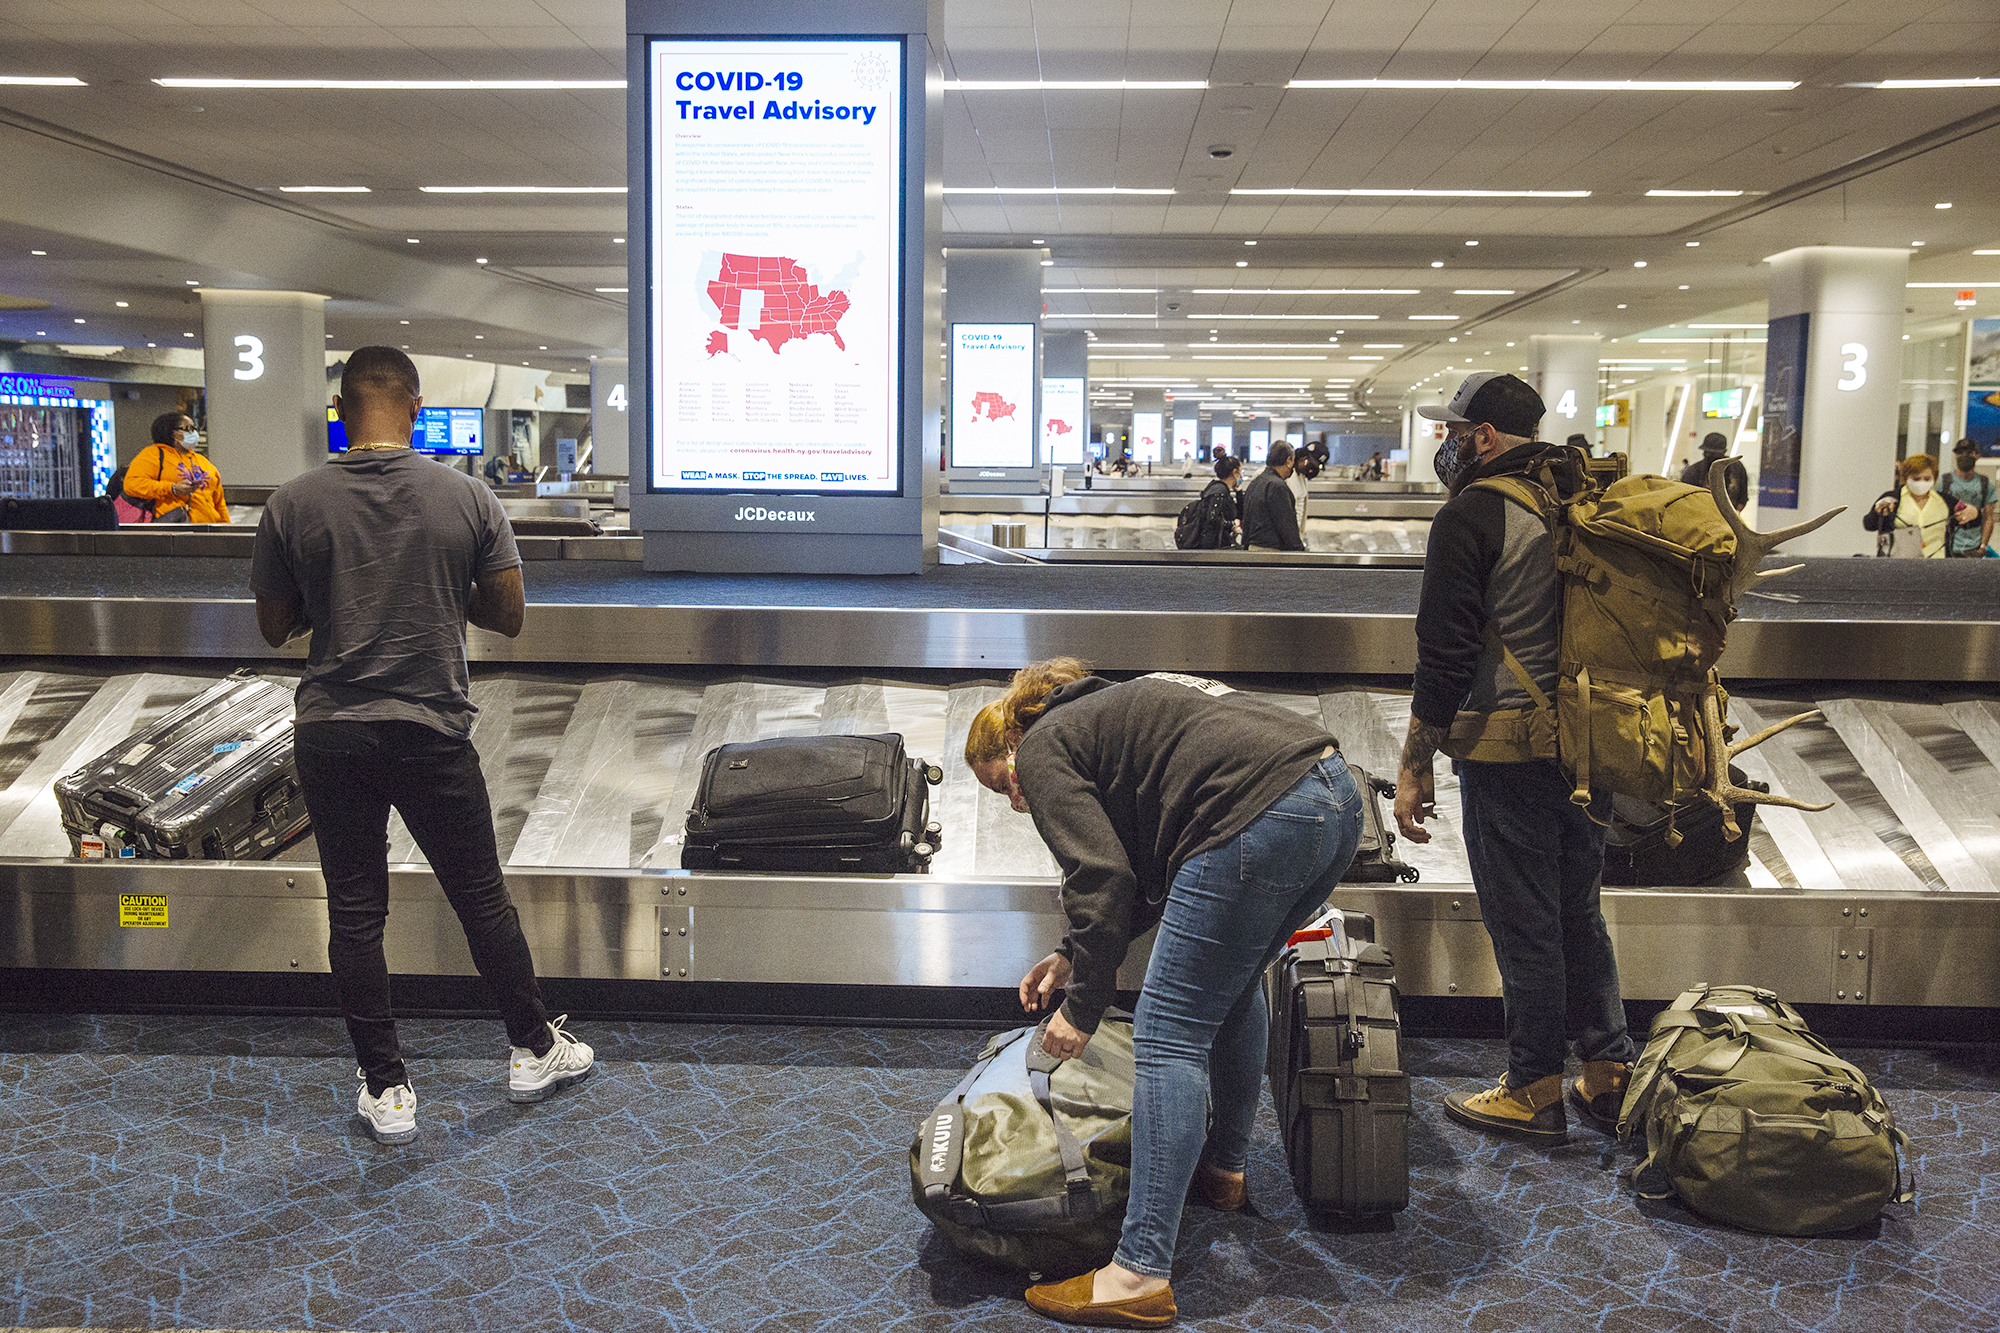 PHOTO: A Covid-19 advisory is displayed on a screen as travelers collect luggage in the baggage claim area of Terminal B at LaGuardia Airport in New York, Sept. 28, 2020.